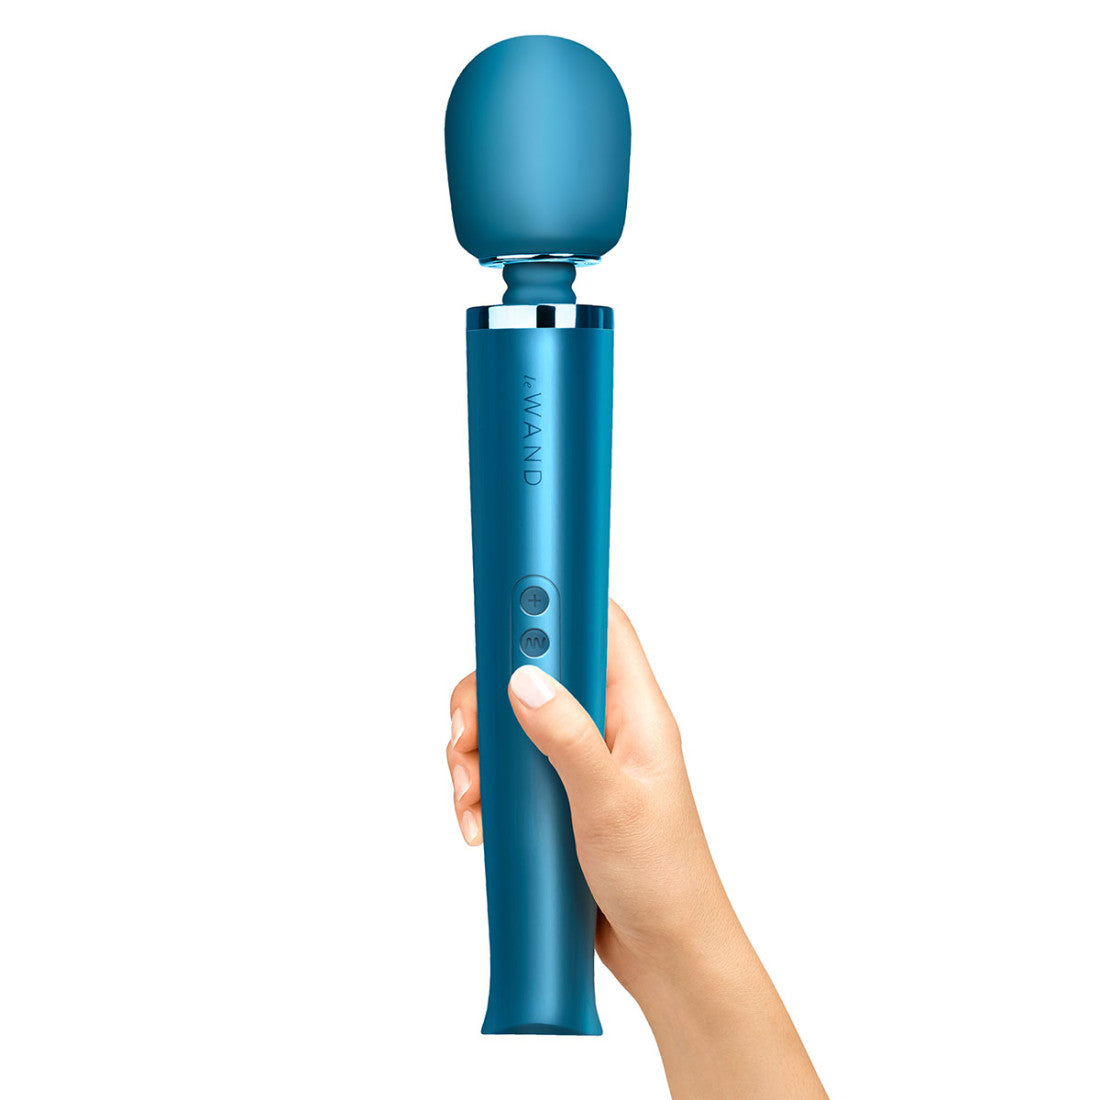 Le Wand Massager